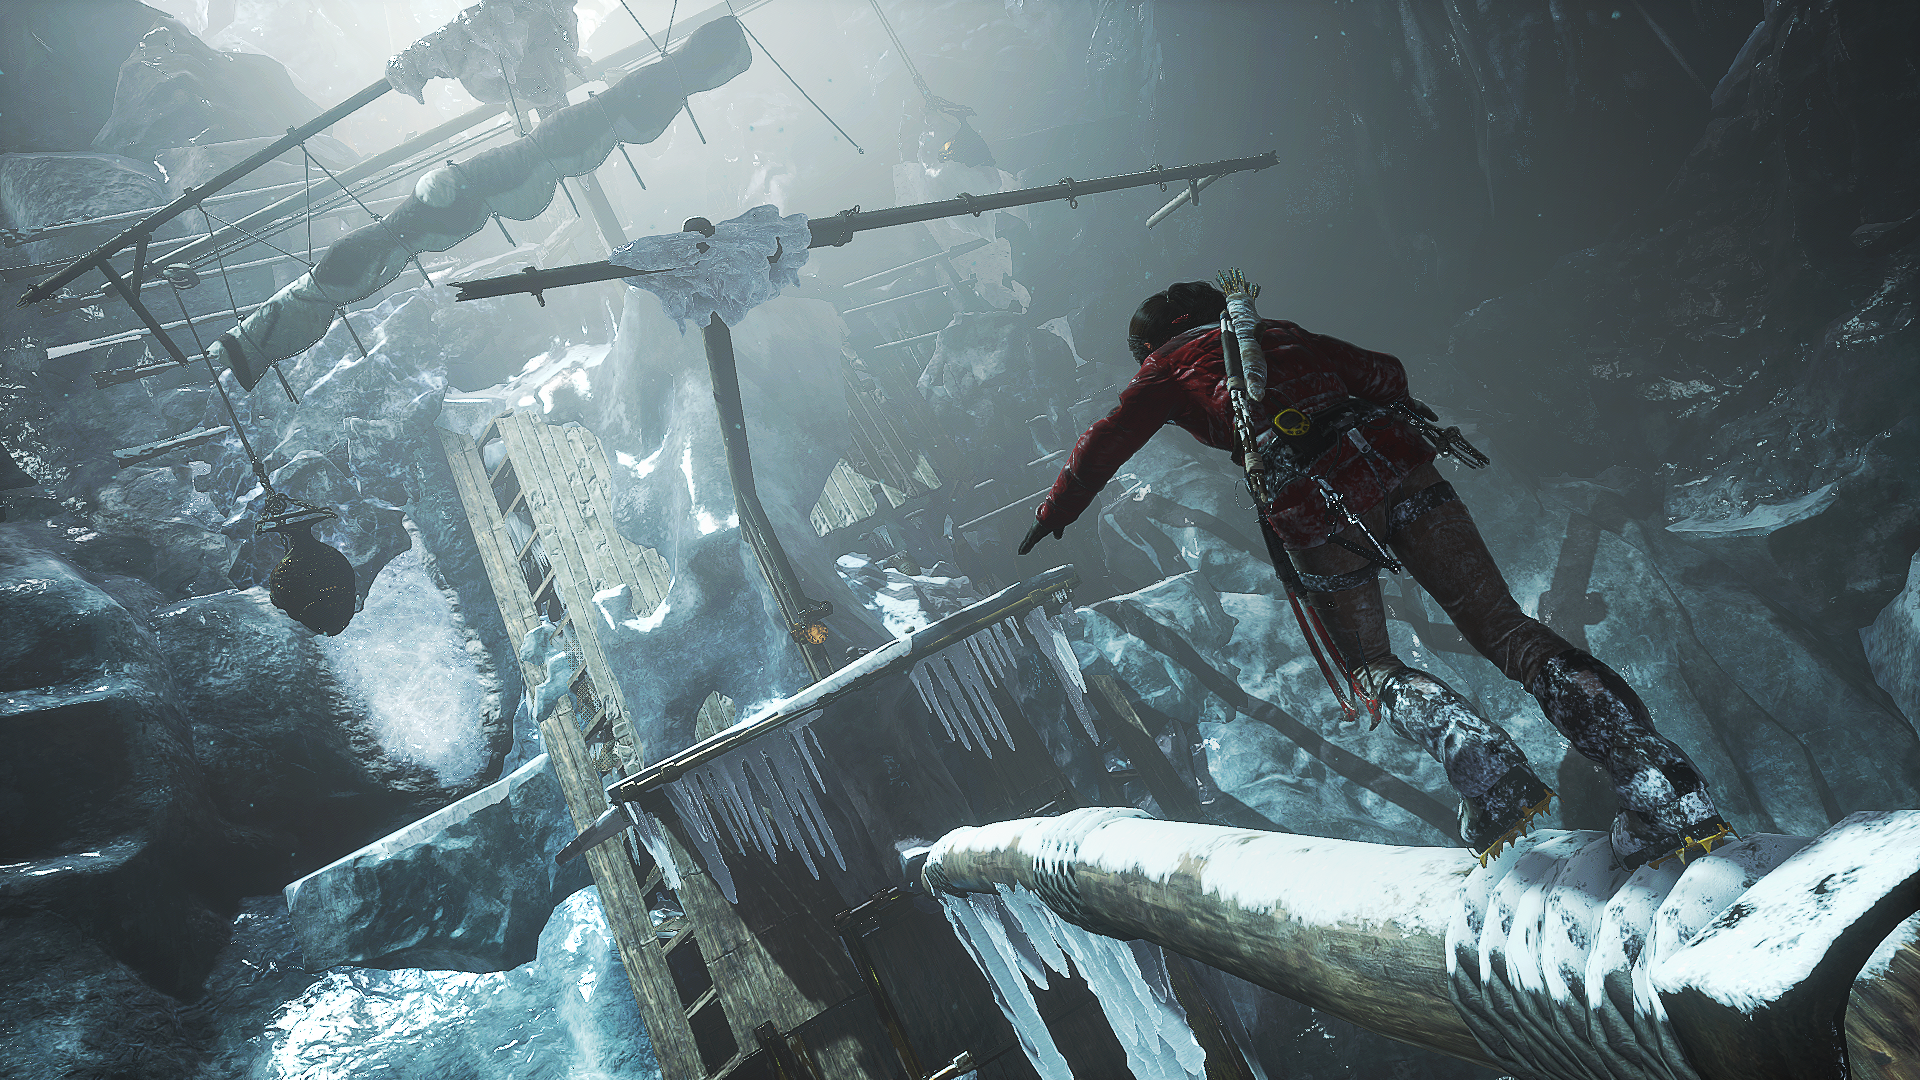 “Tomb Raider” Director States “Happiness” for Dev Team - Also Says 